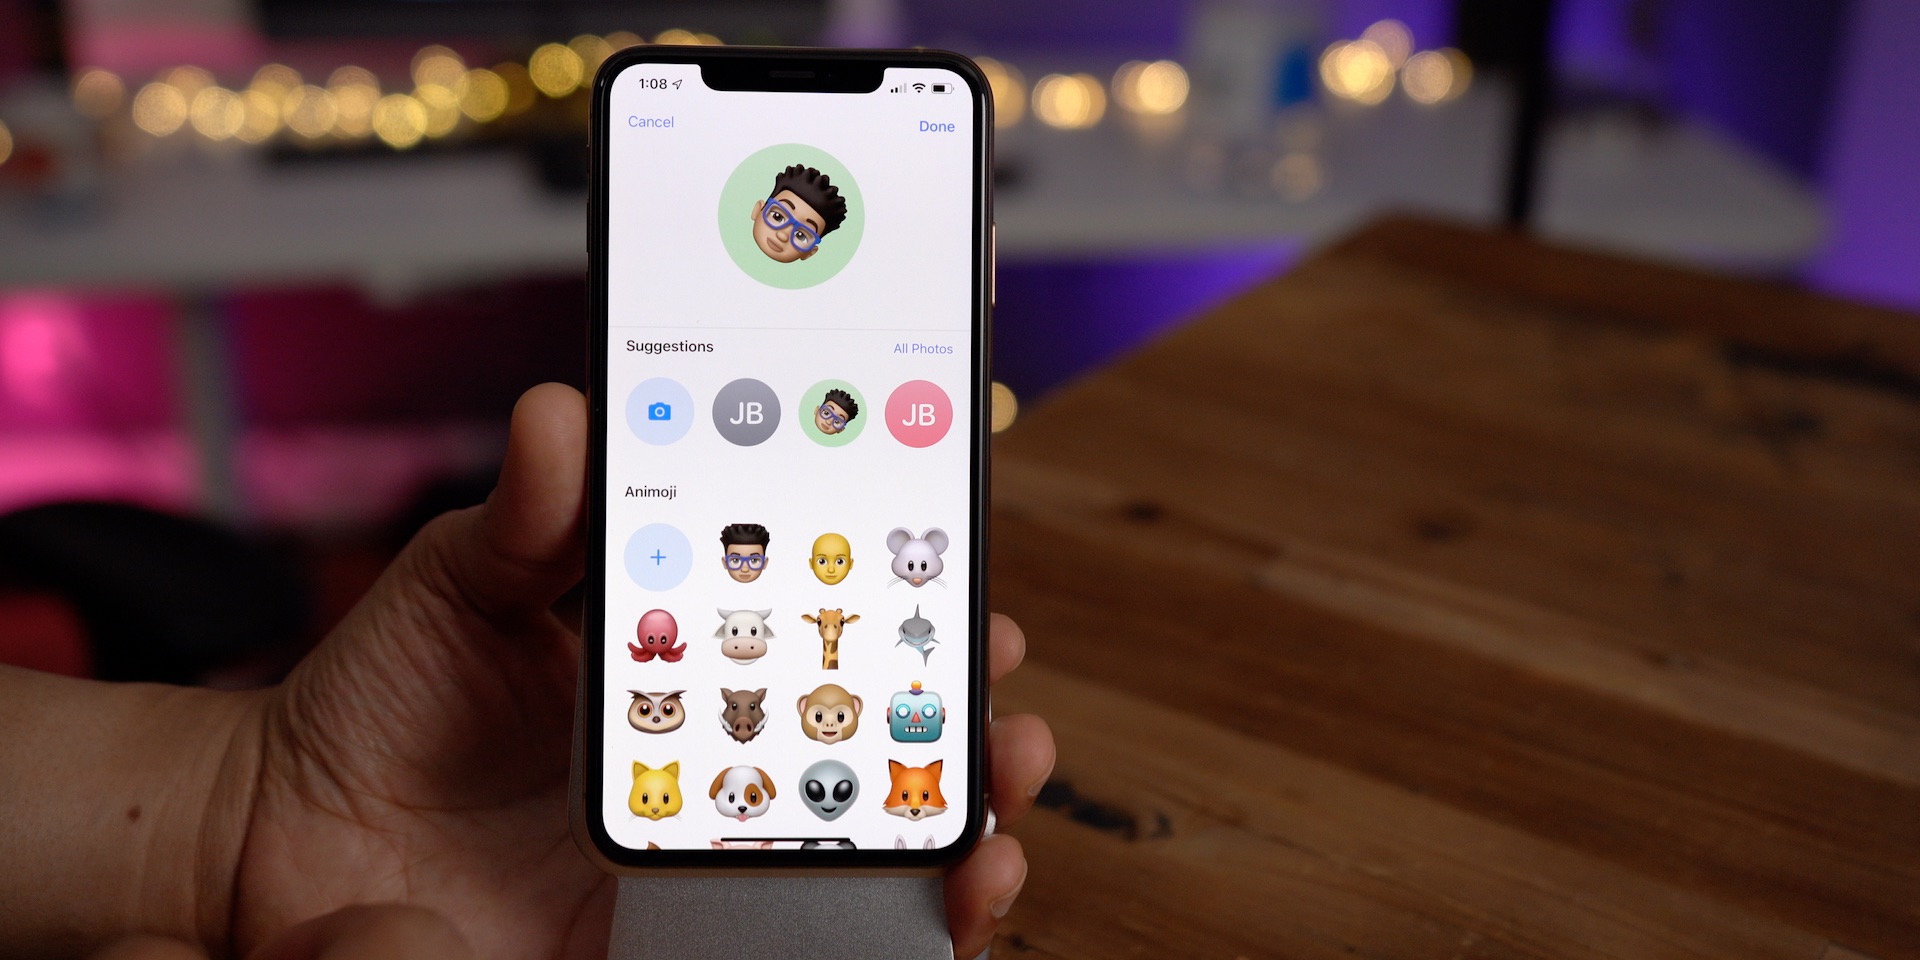 iOS 13 changes Contacts